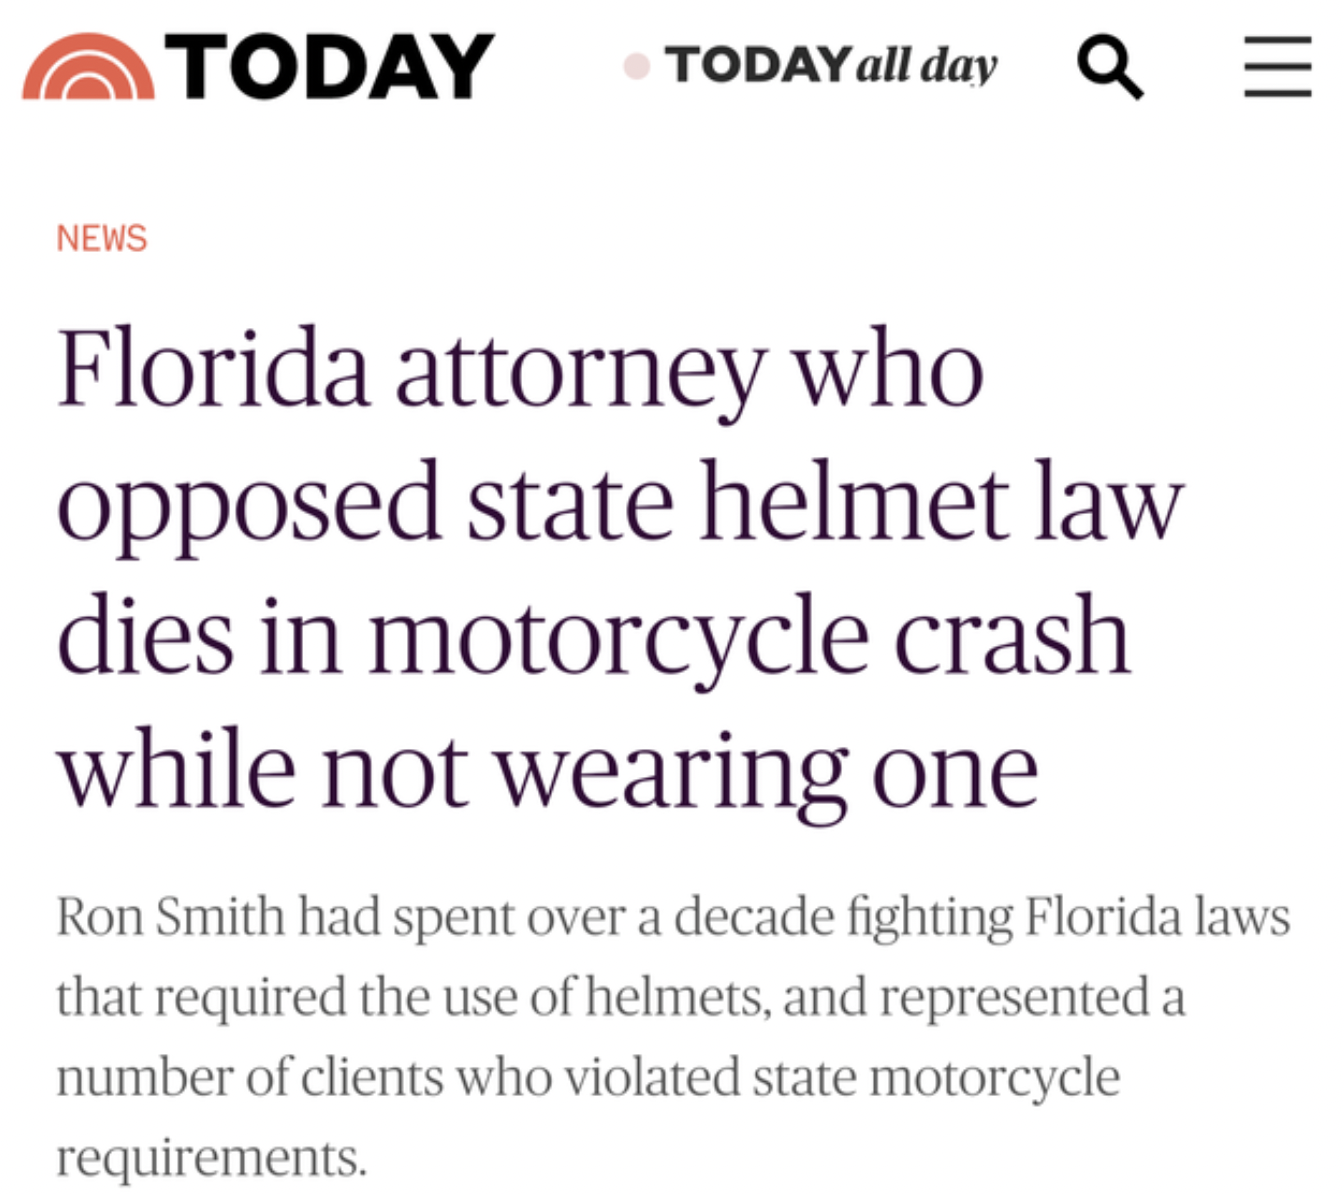 Funny facepalms - News Today Today all day Q Florida attorney who opposed state helmet law dies in motorcycle crash while not wearing one ||| Ron Smith had spent over a decade fighting Florida laws that required the use of helmets, an